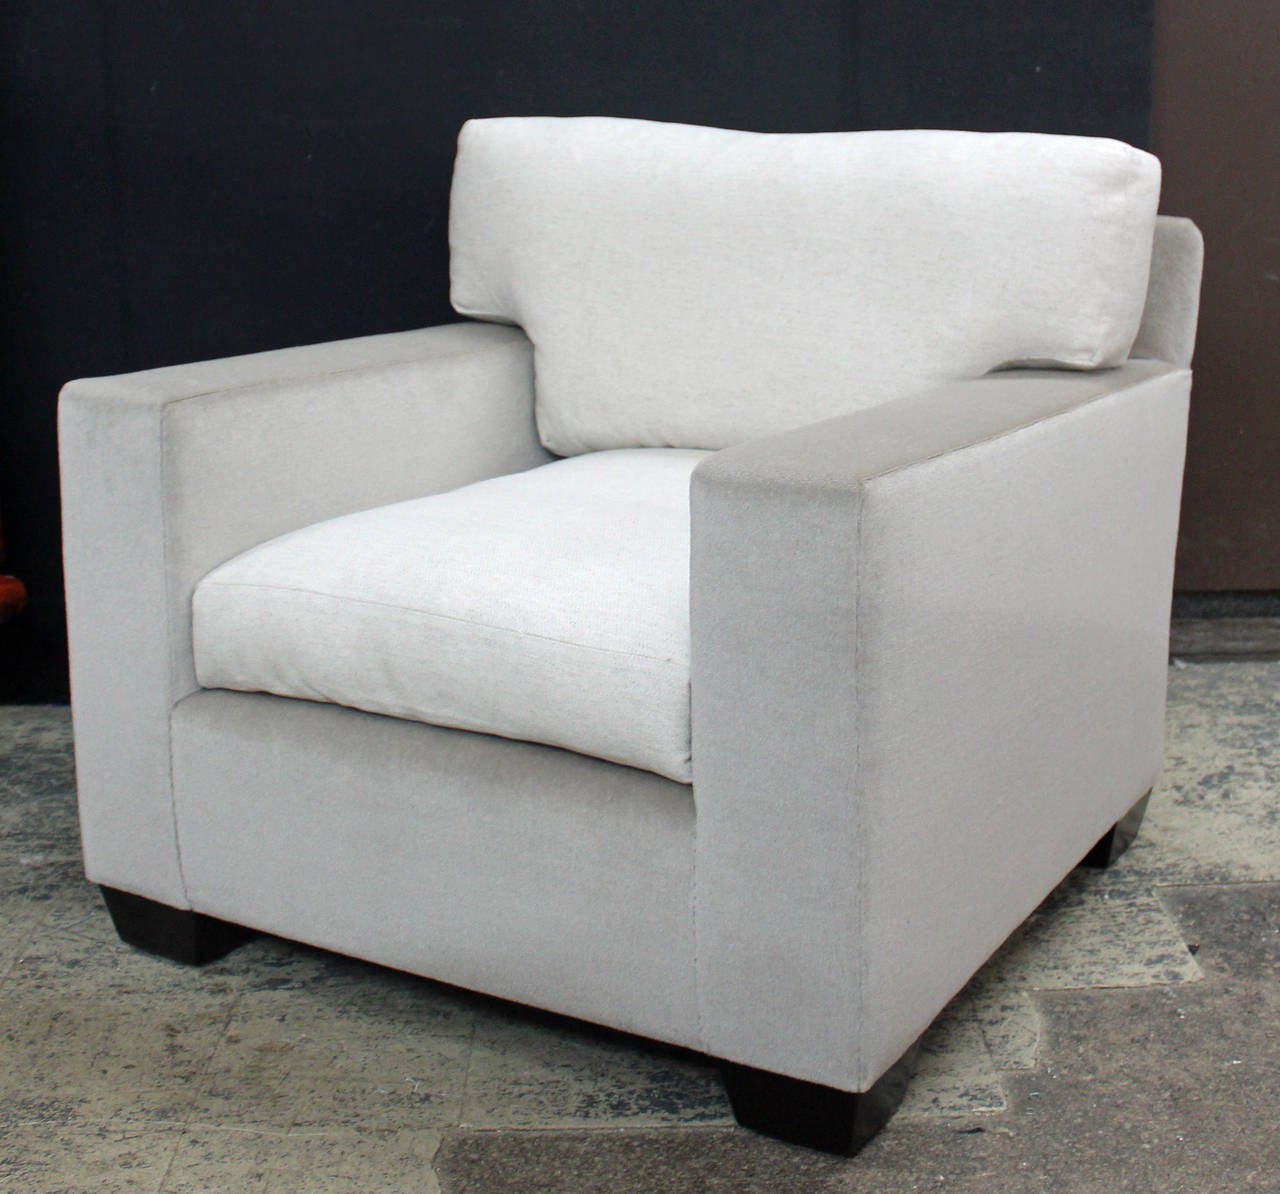 Pair of fully refurbished JMF style club chairs. The bodies are upholstered in a platinum silk mohair, the seat and back cushions are in a platinum and off-white linen. The feet are finished in a satin Espresso. The seat composition is down/down